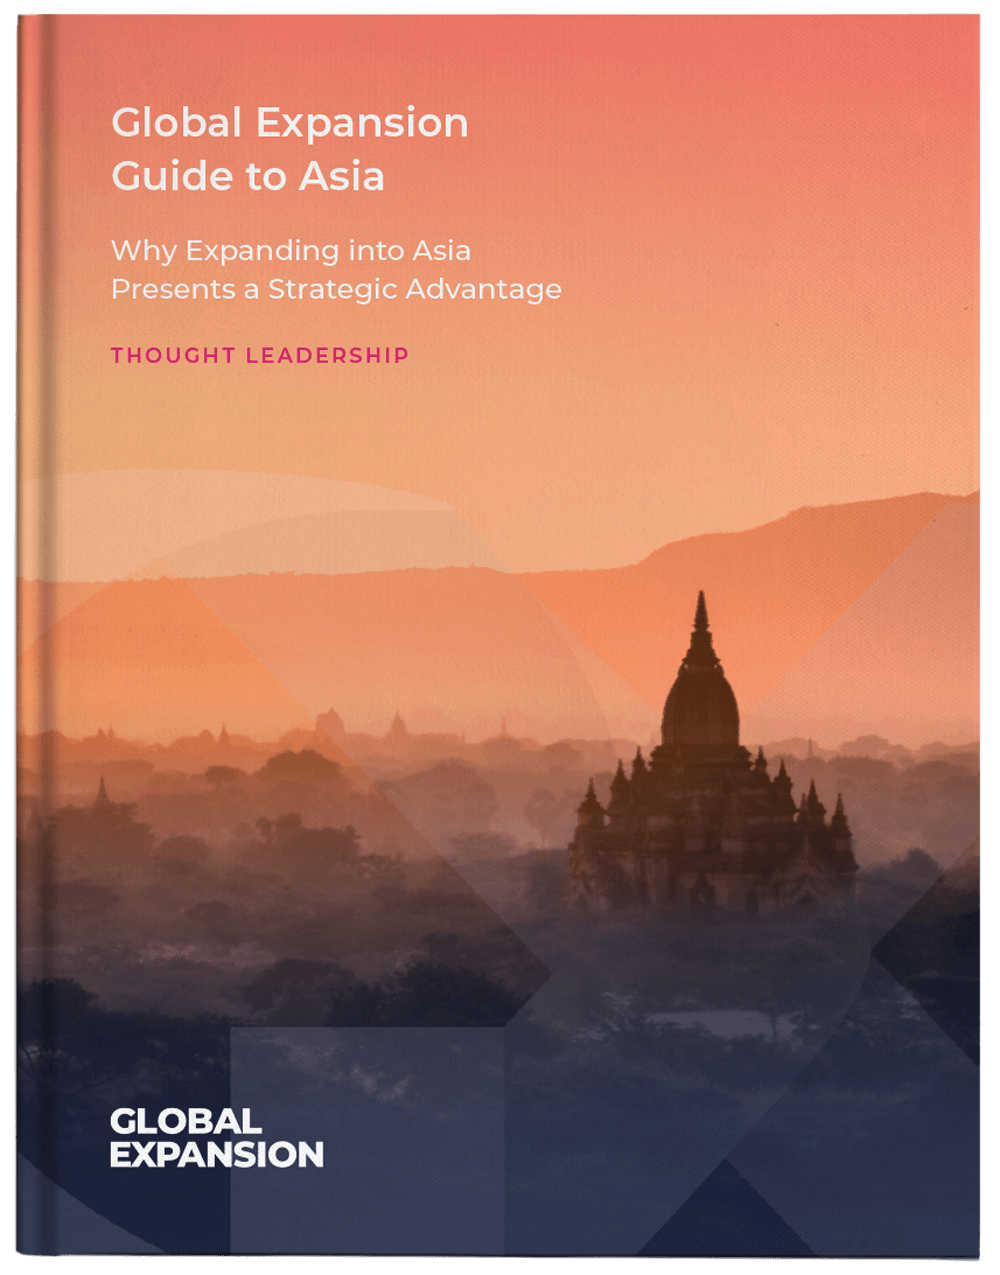 GX_Global-Expansion-Guide-to-Asia-Cover